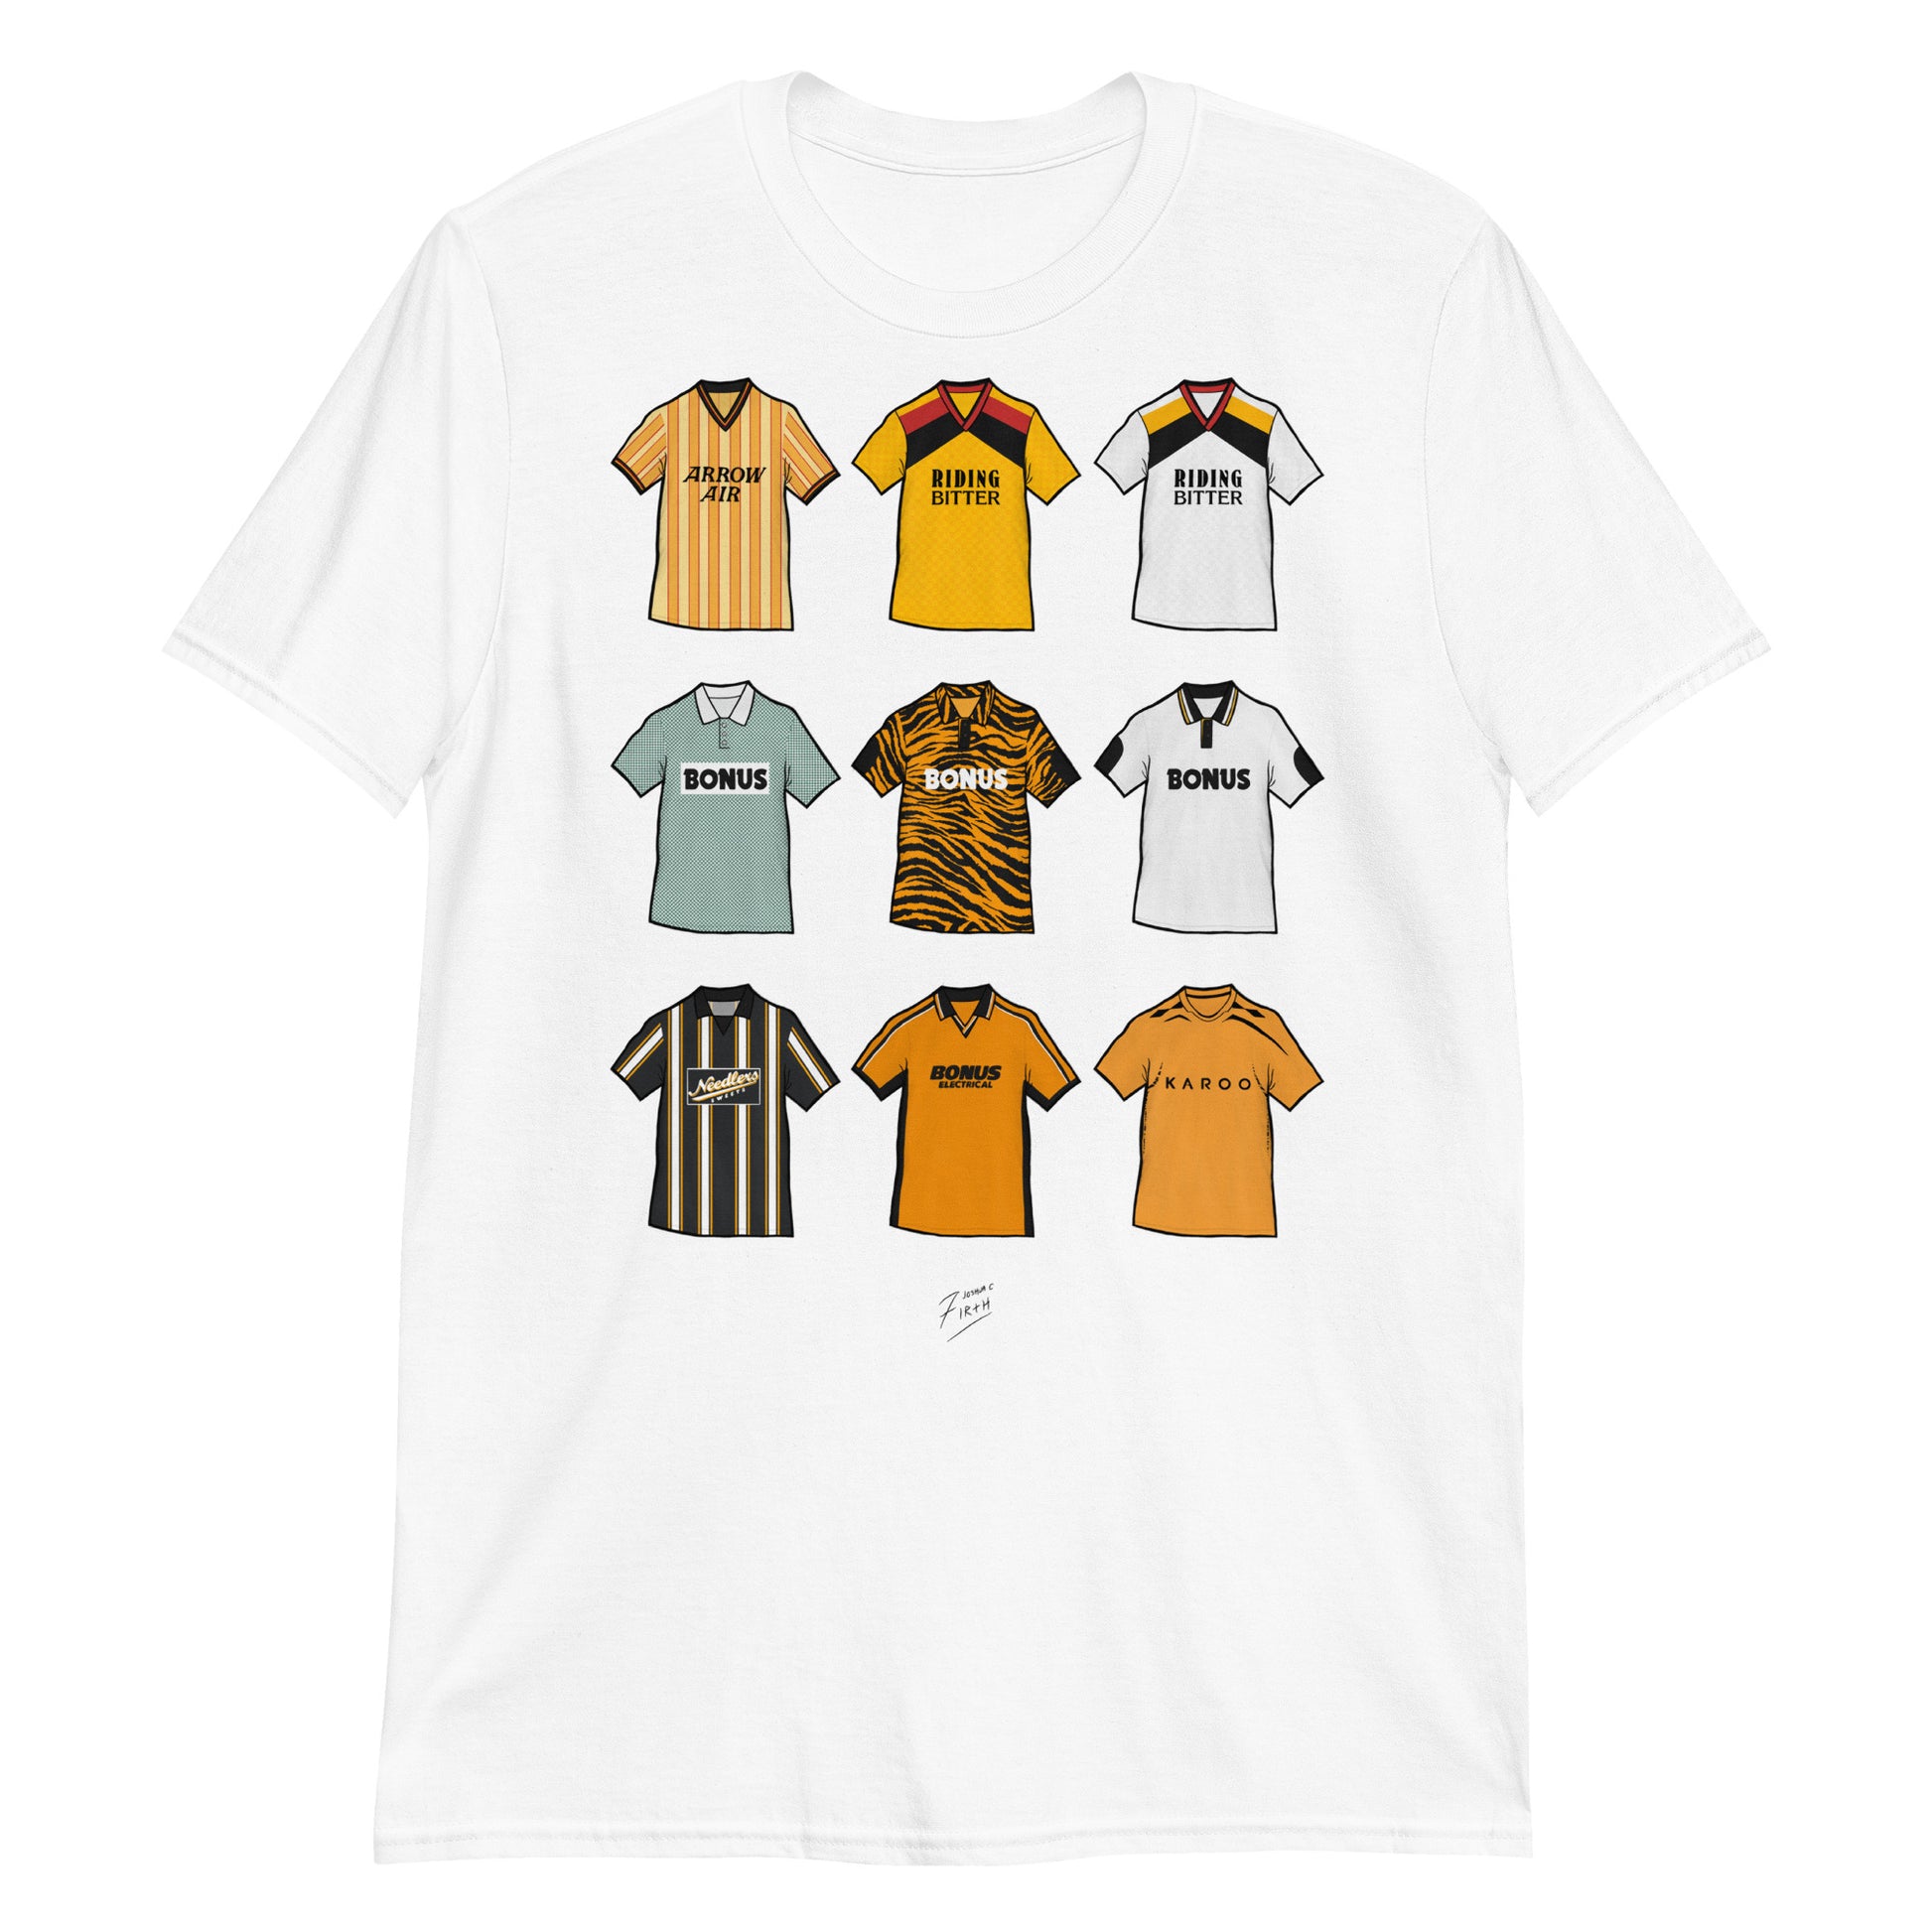 White Hull City themed football t-shirt featuring artwork of some of the most iconic jerseys in the history of the club